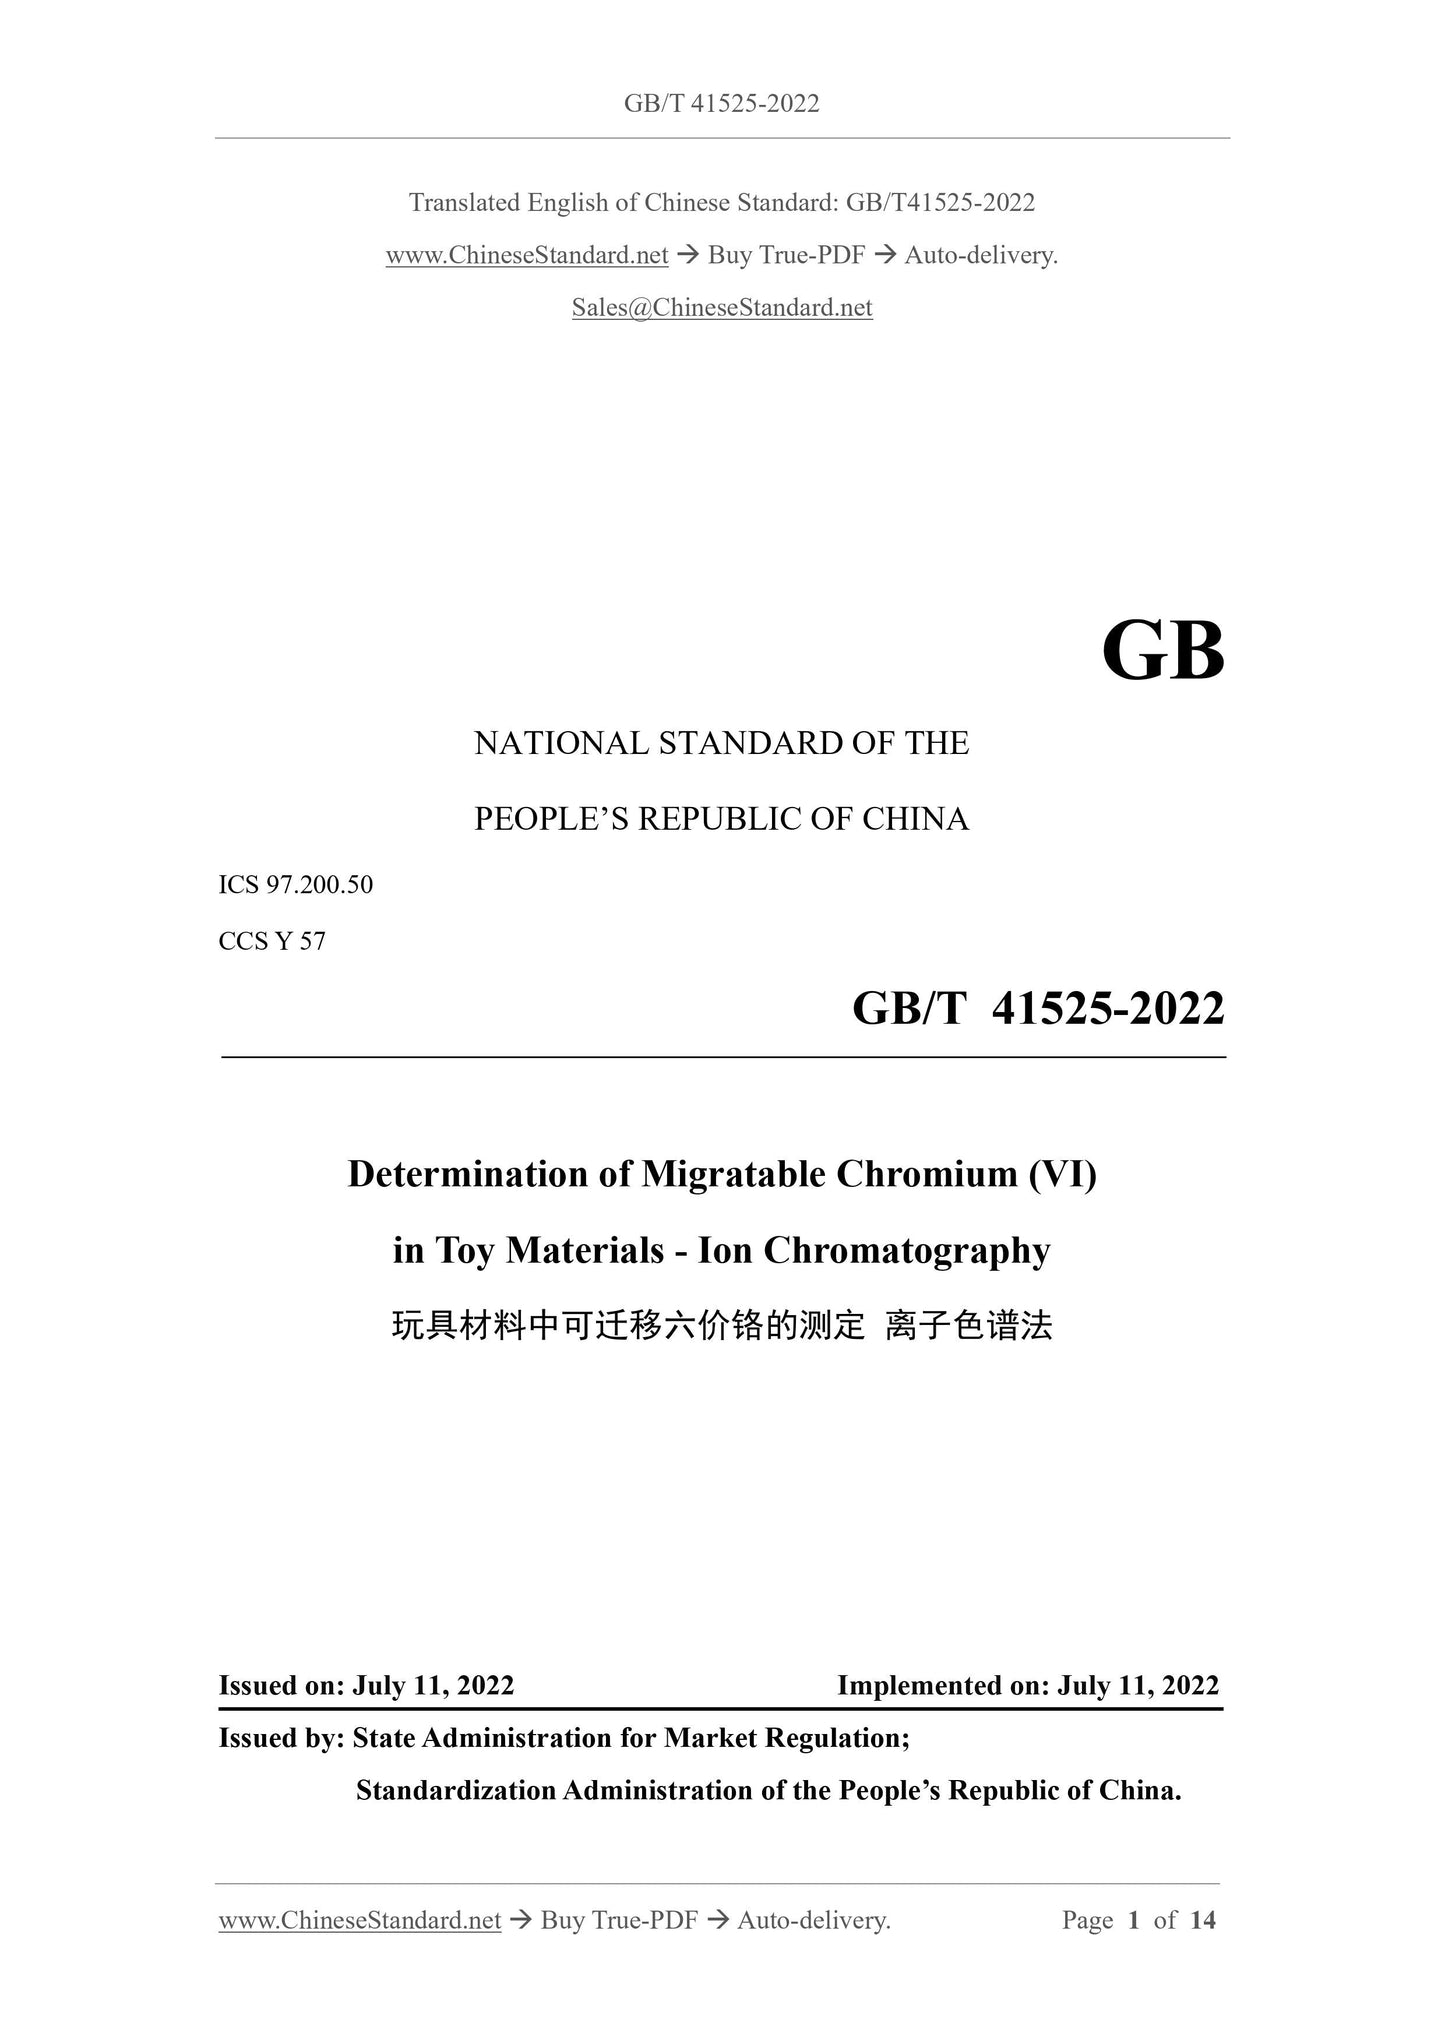 GB/T 41525-2022 Page 1